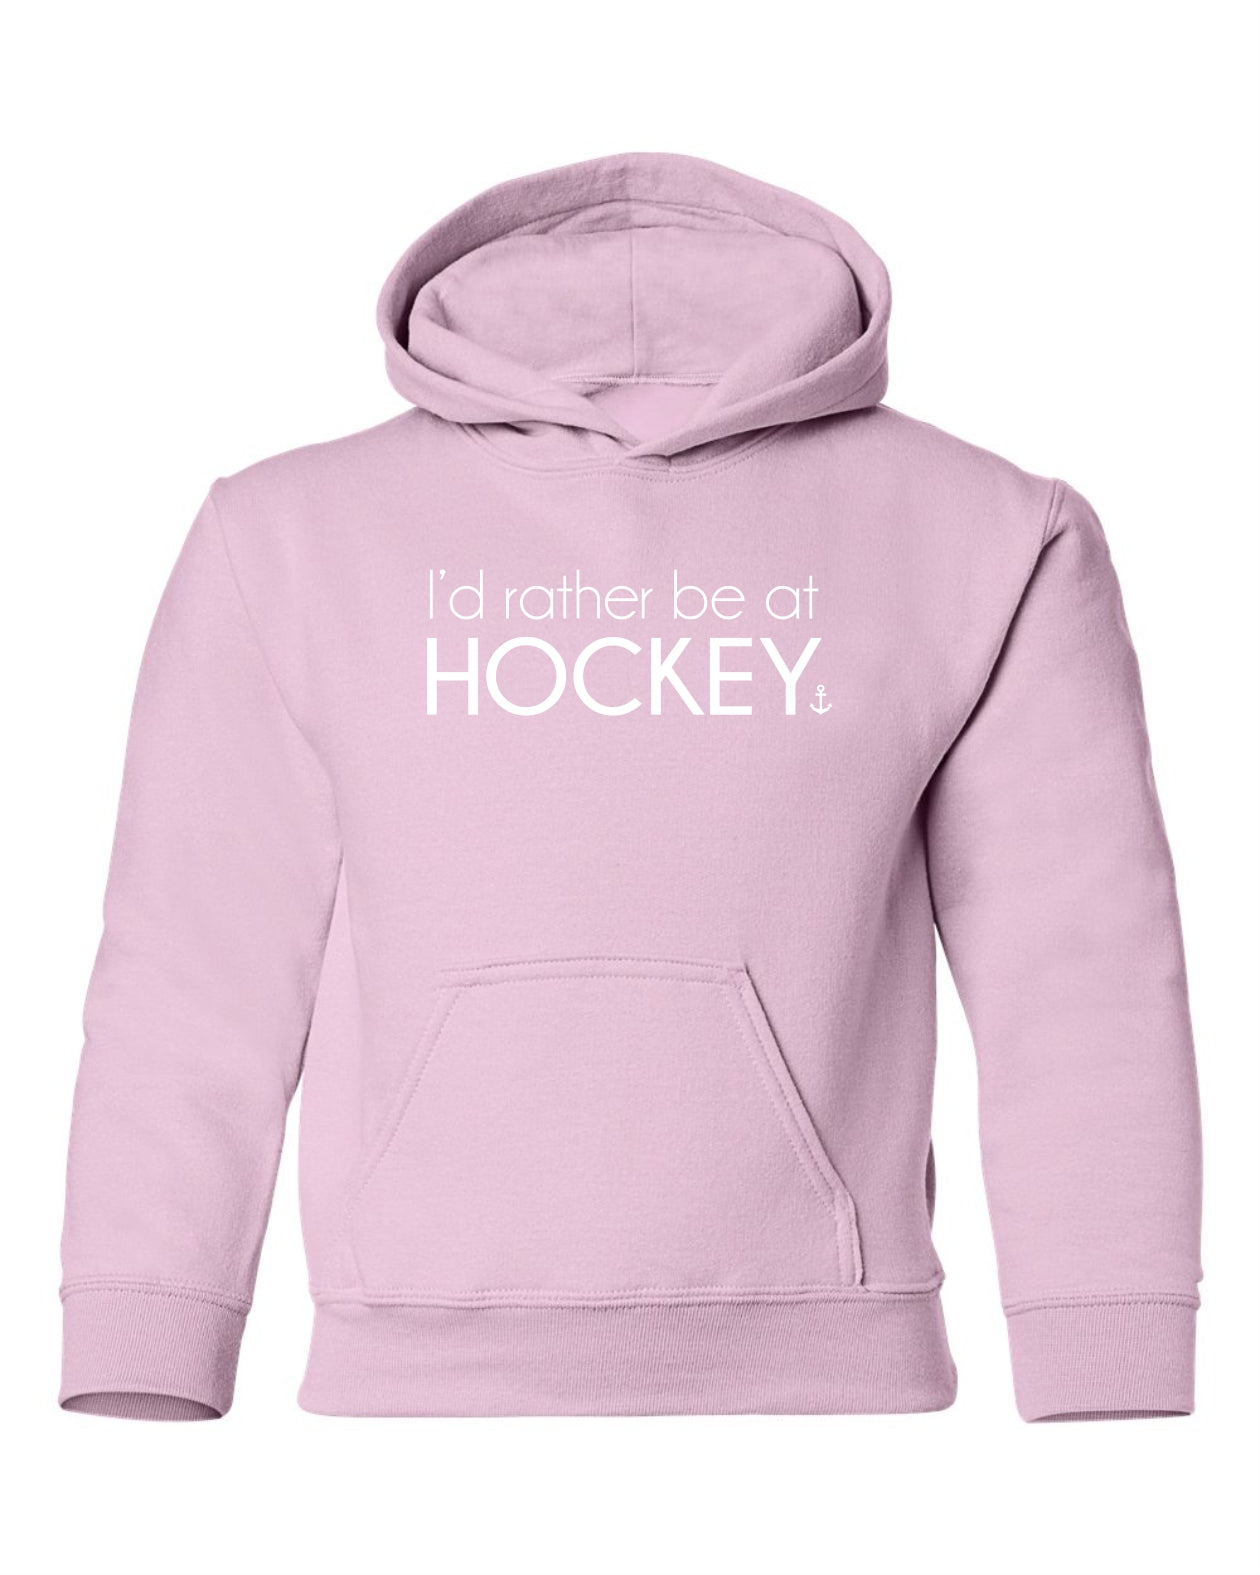 "I'd Rather Be At Hockey" Youth Hoodie